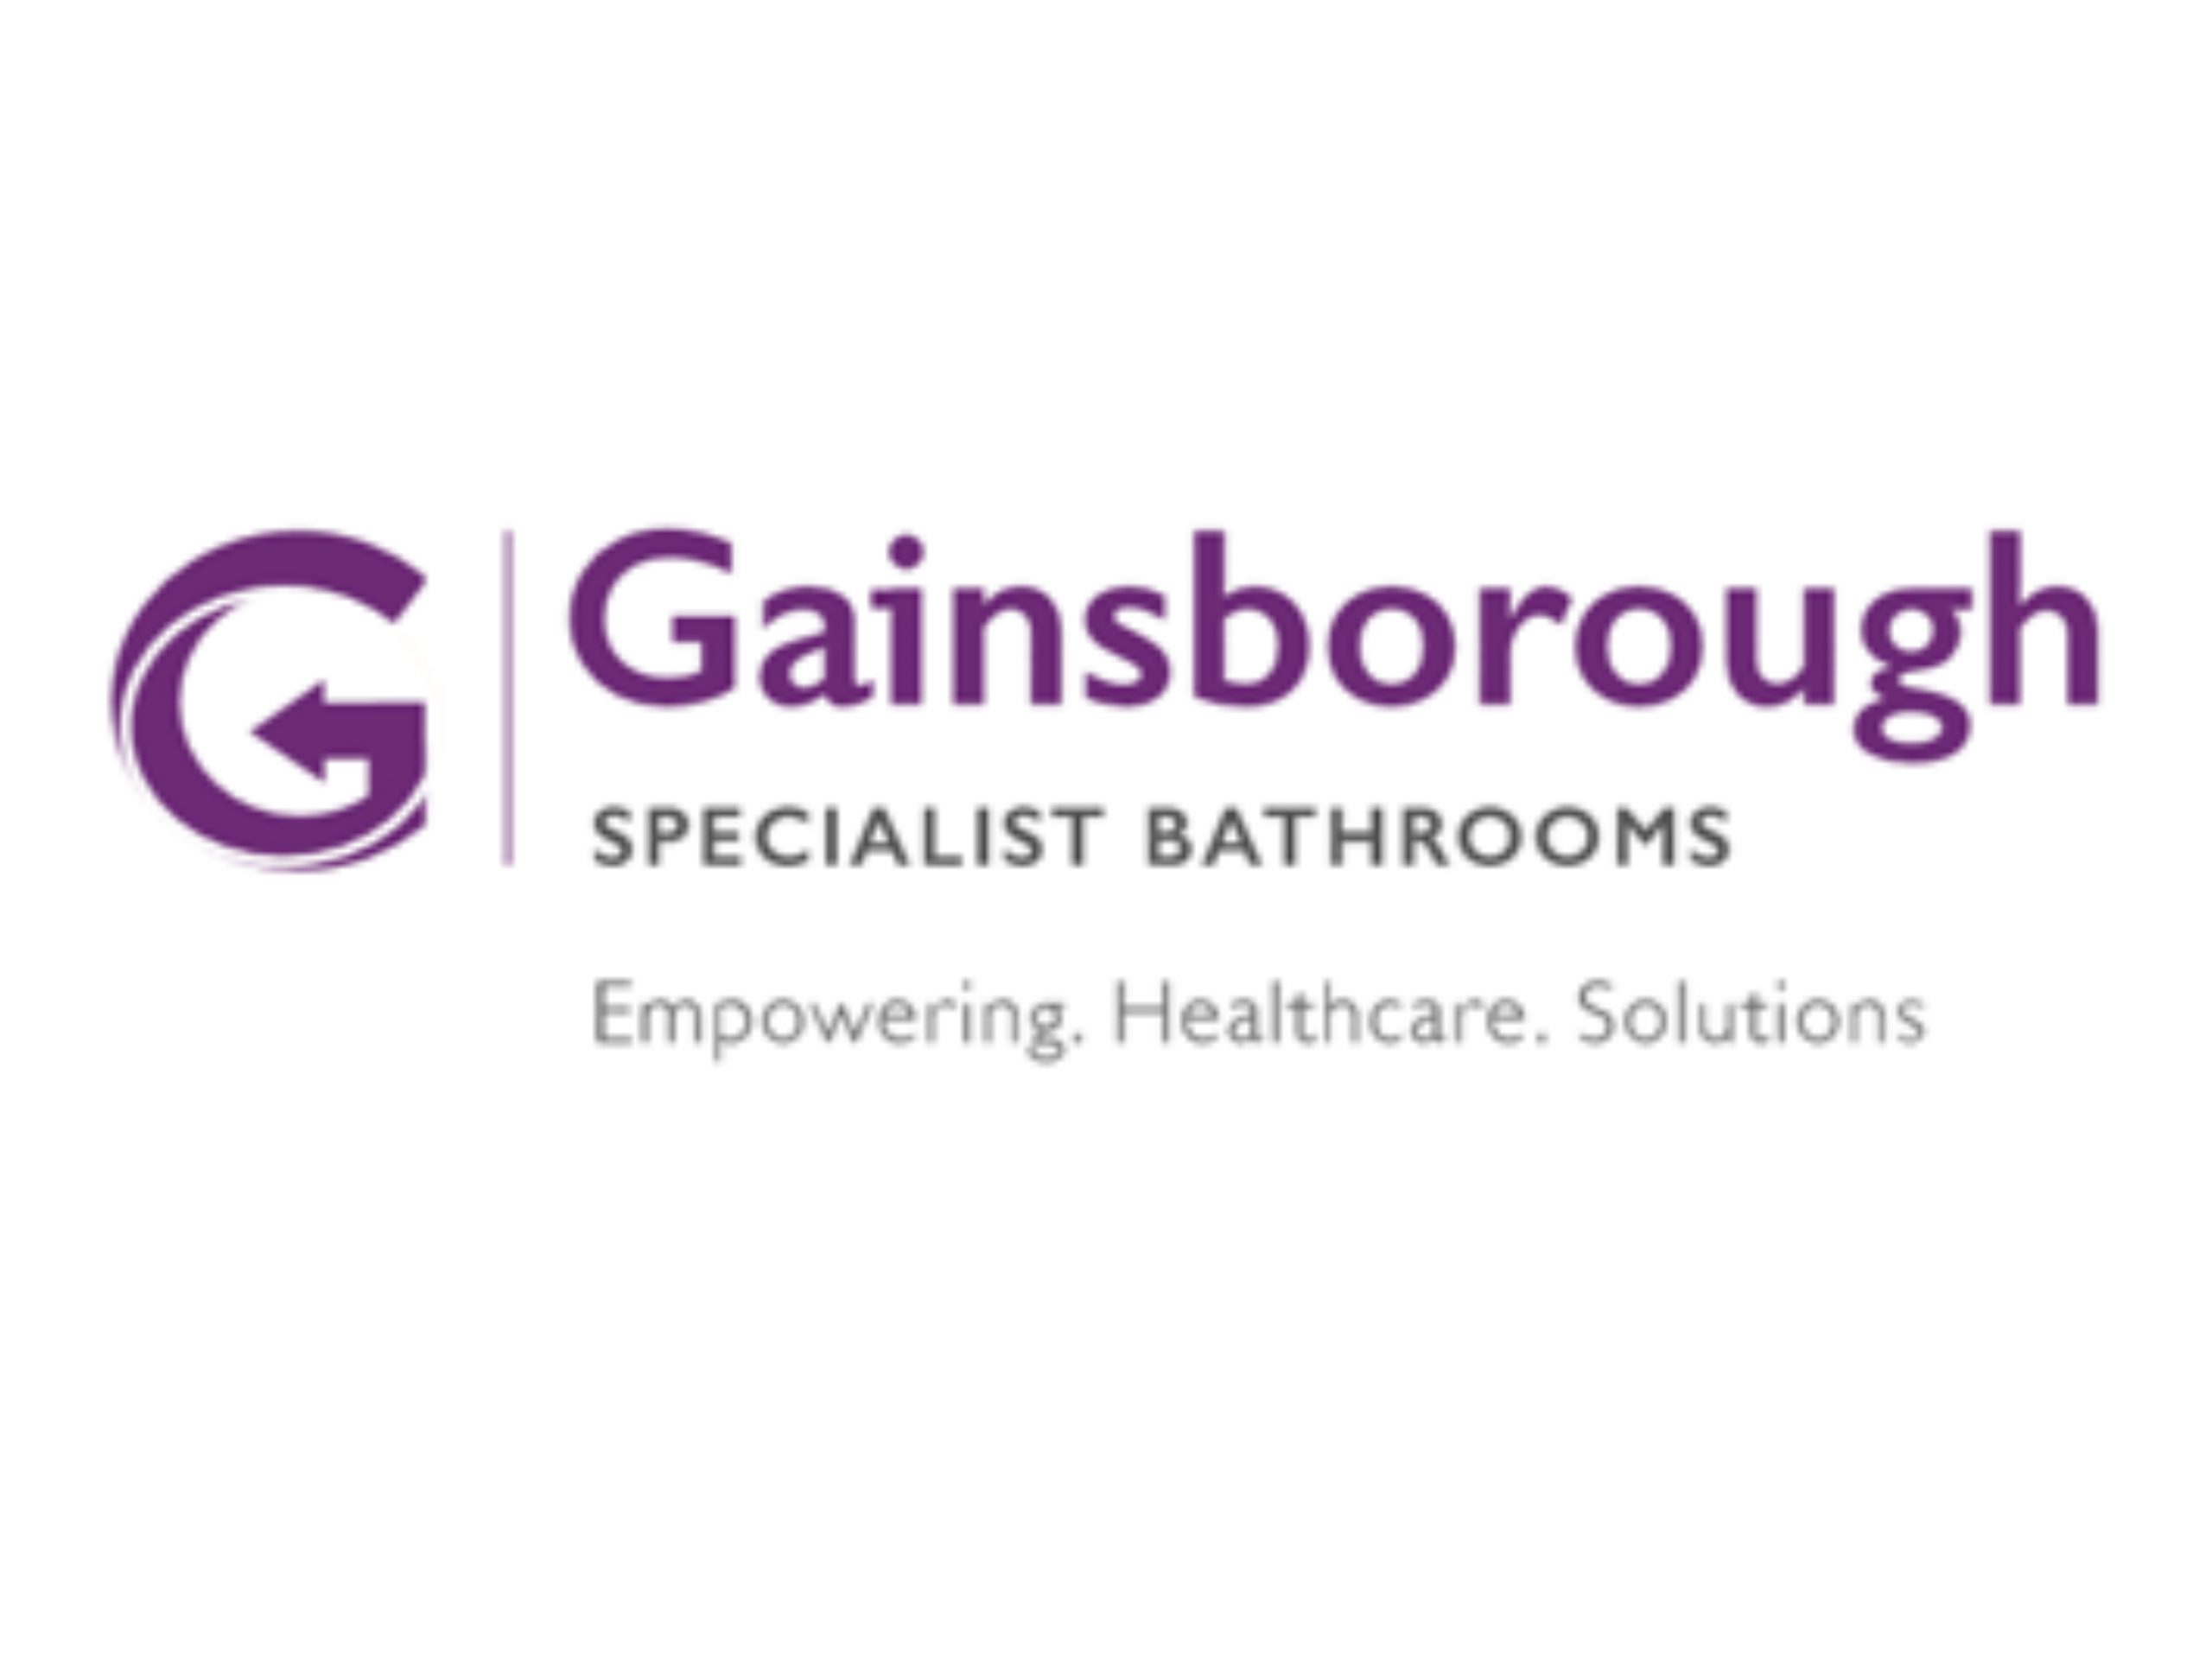 Gainsborough Specialist Bathrooms Completes Highly Specialist G360 Wet Rooms at NHS Welland Centre Mental Health Facility